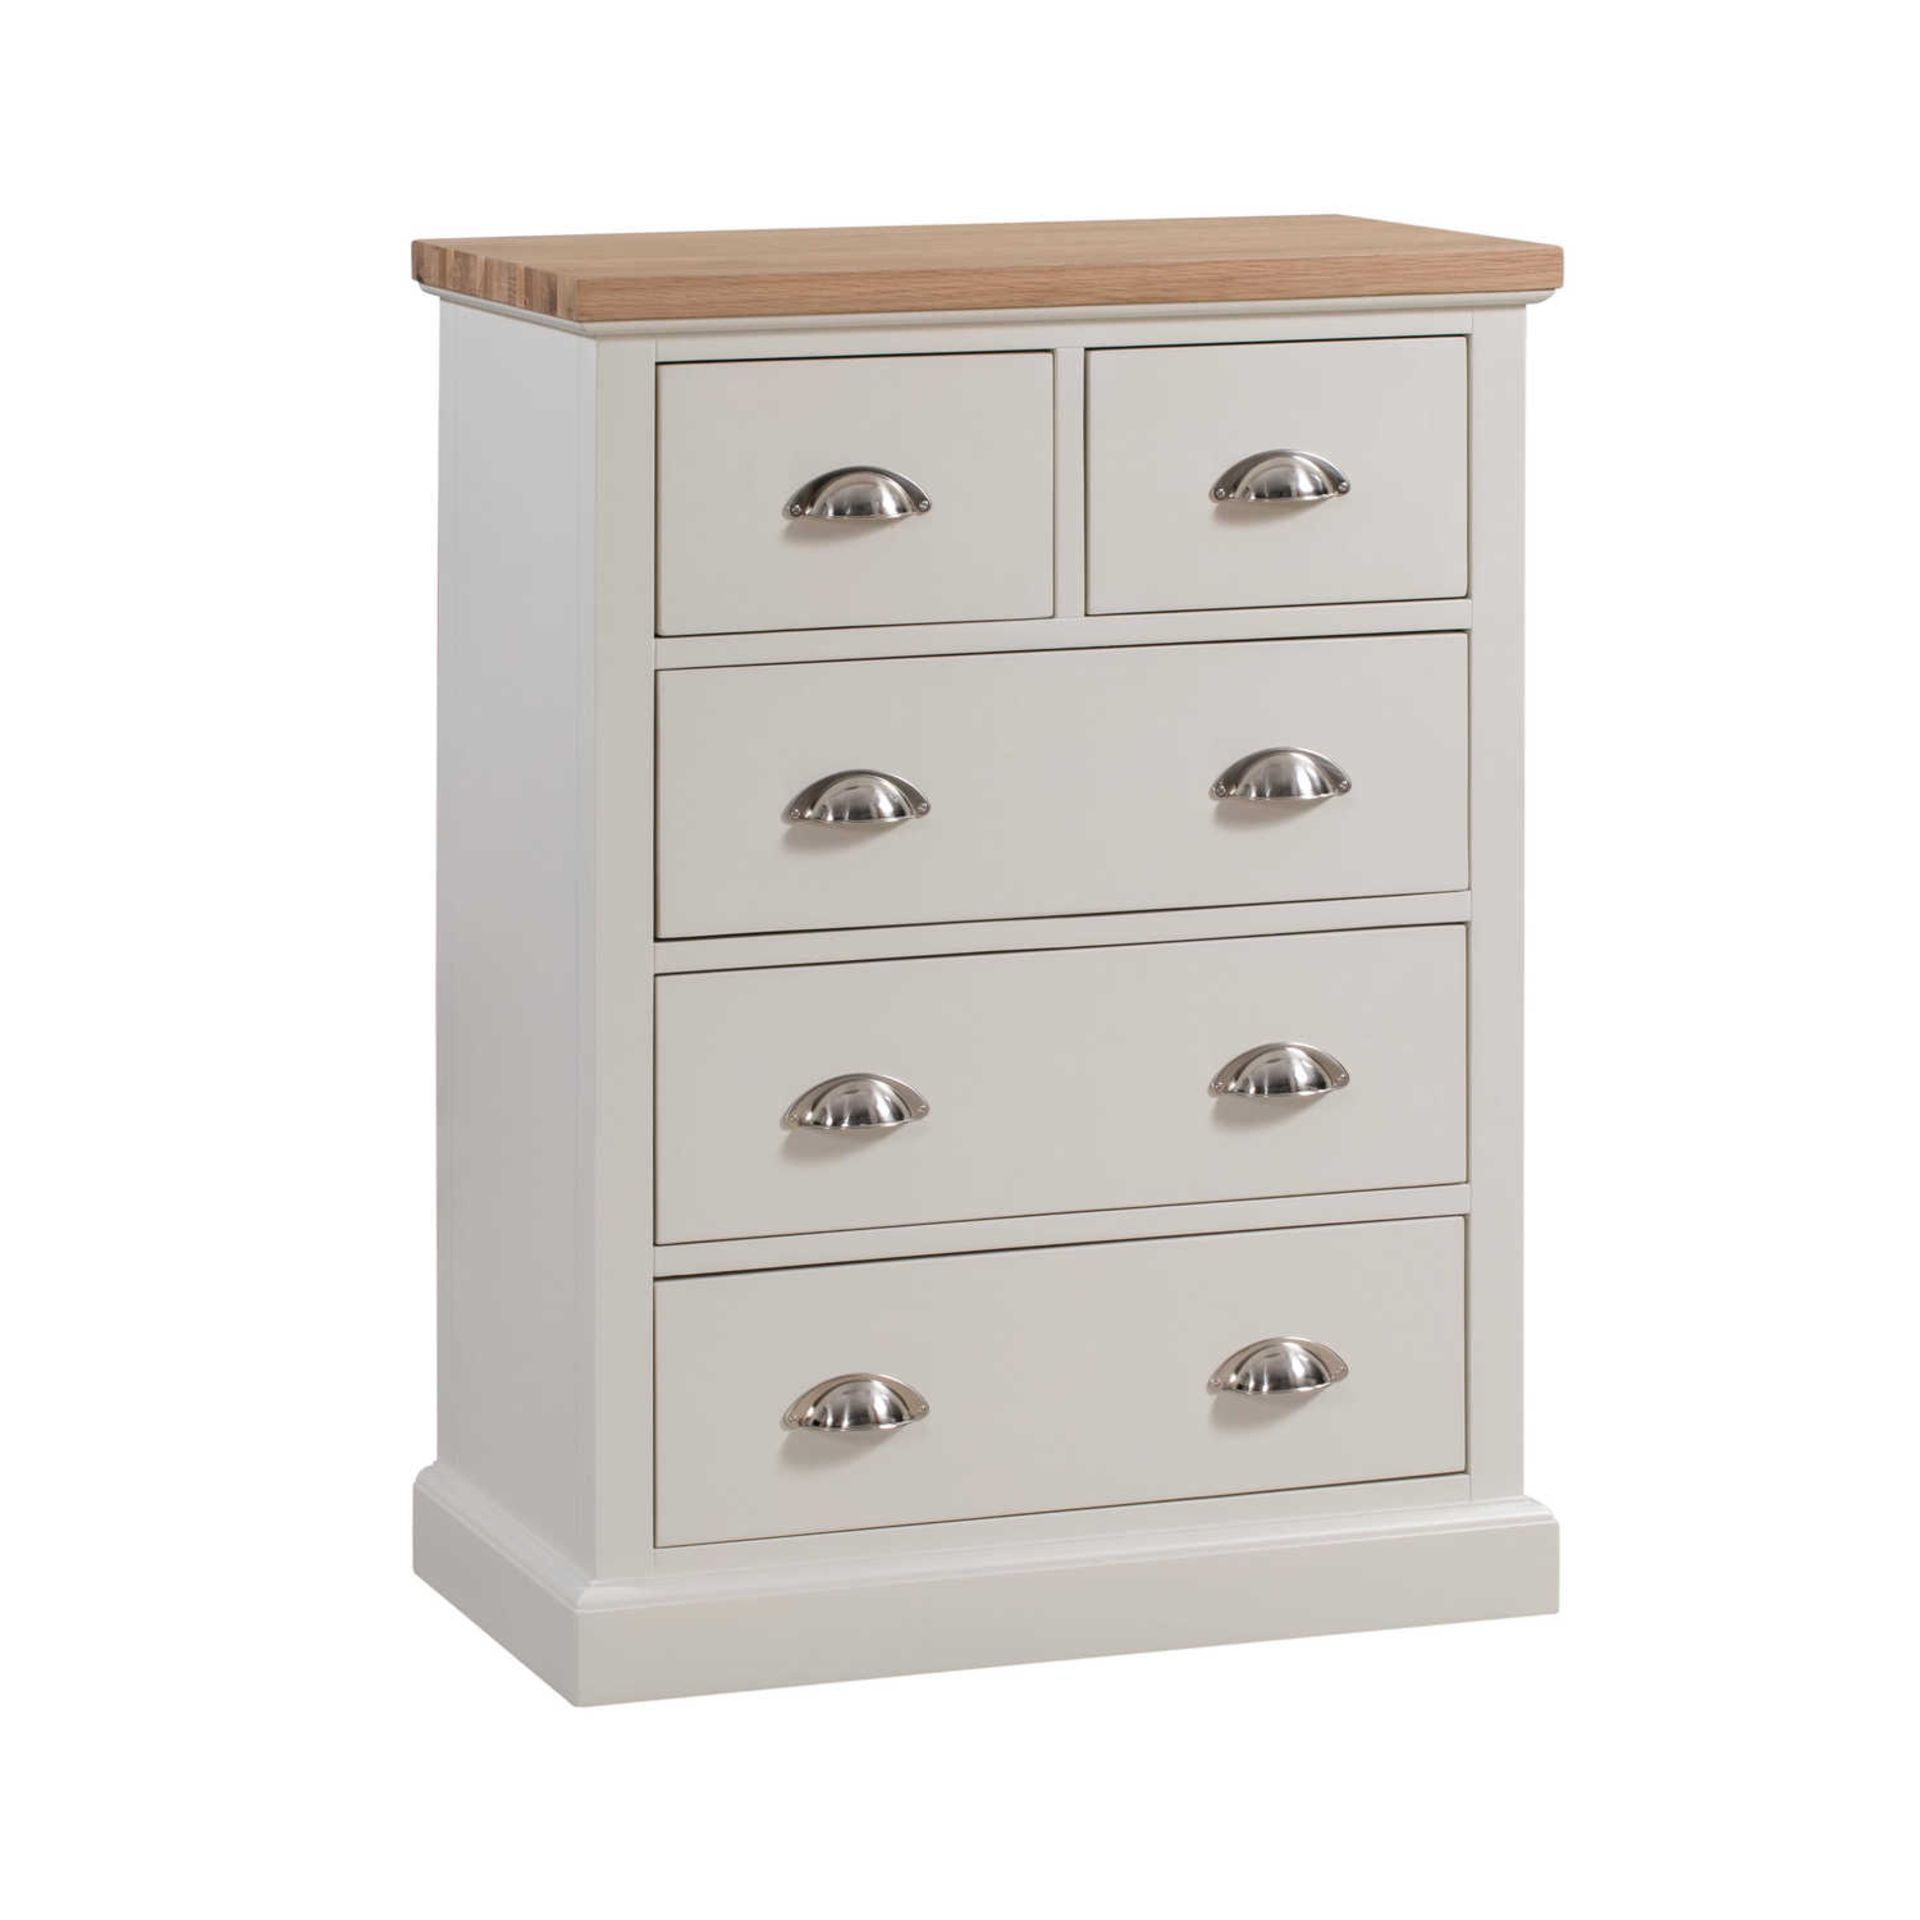 The Ripley Collection Two Over Three Drawer Chest Two Over Three Chest Of Drawers, a functional